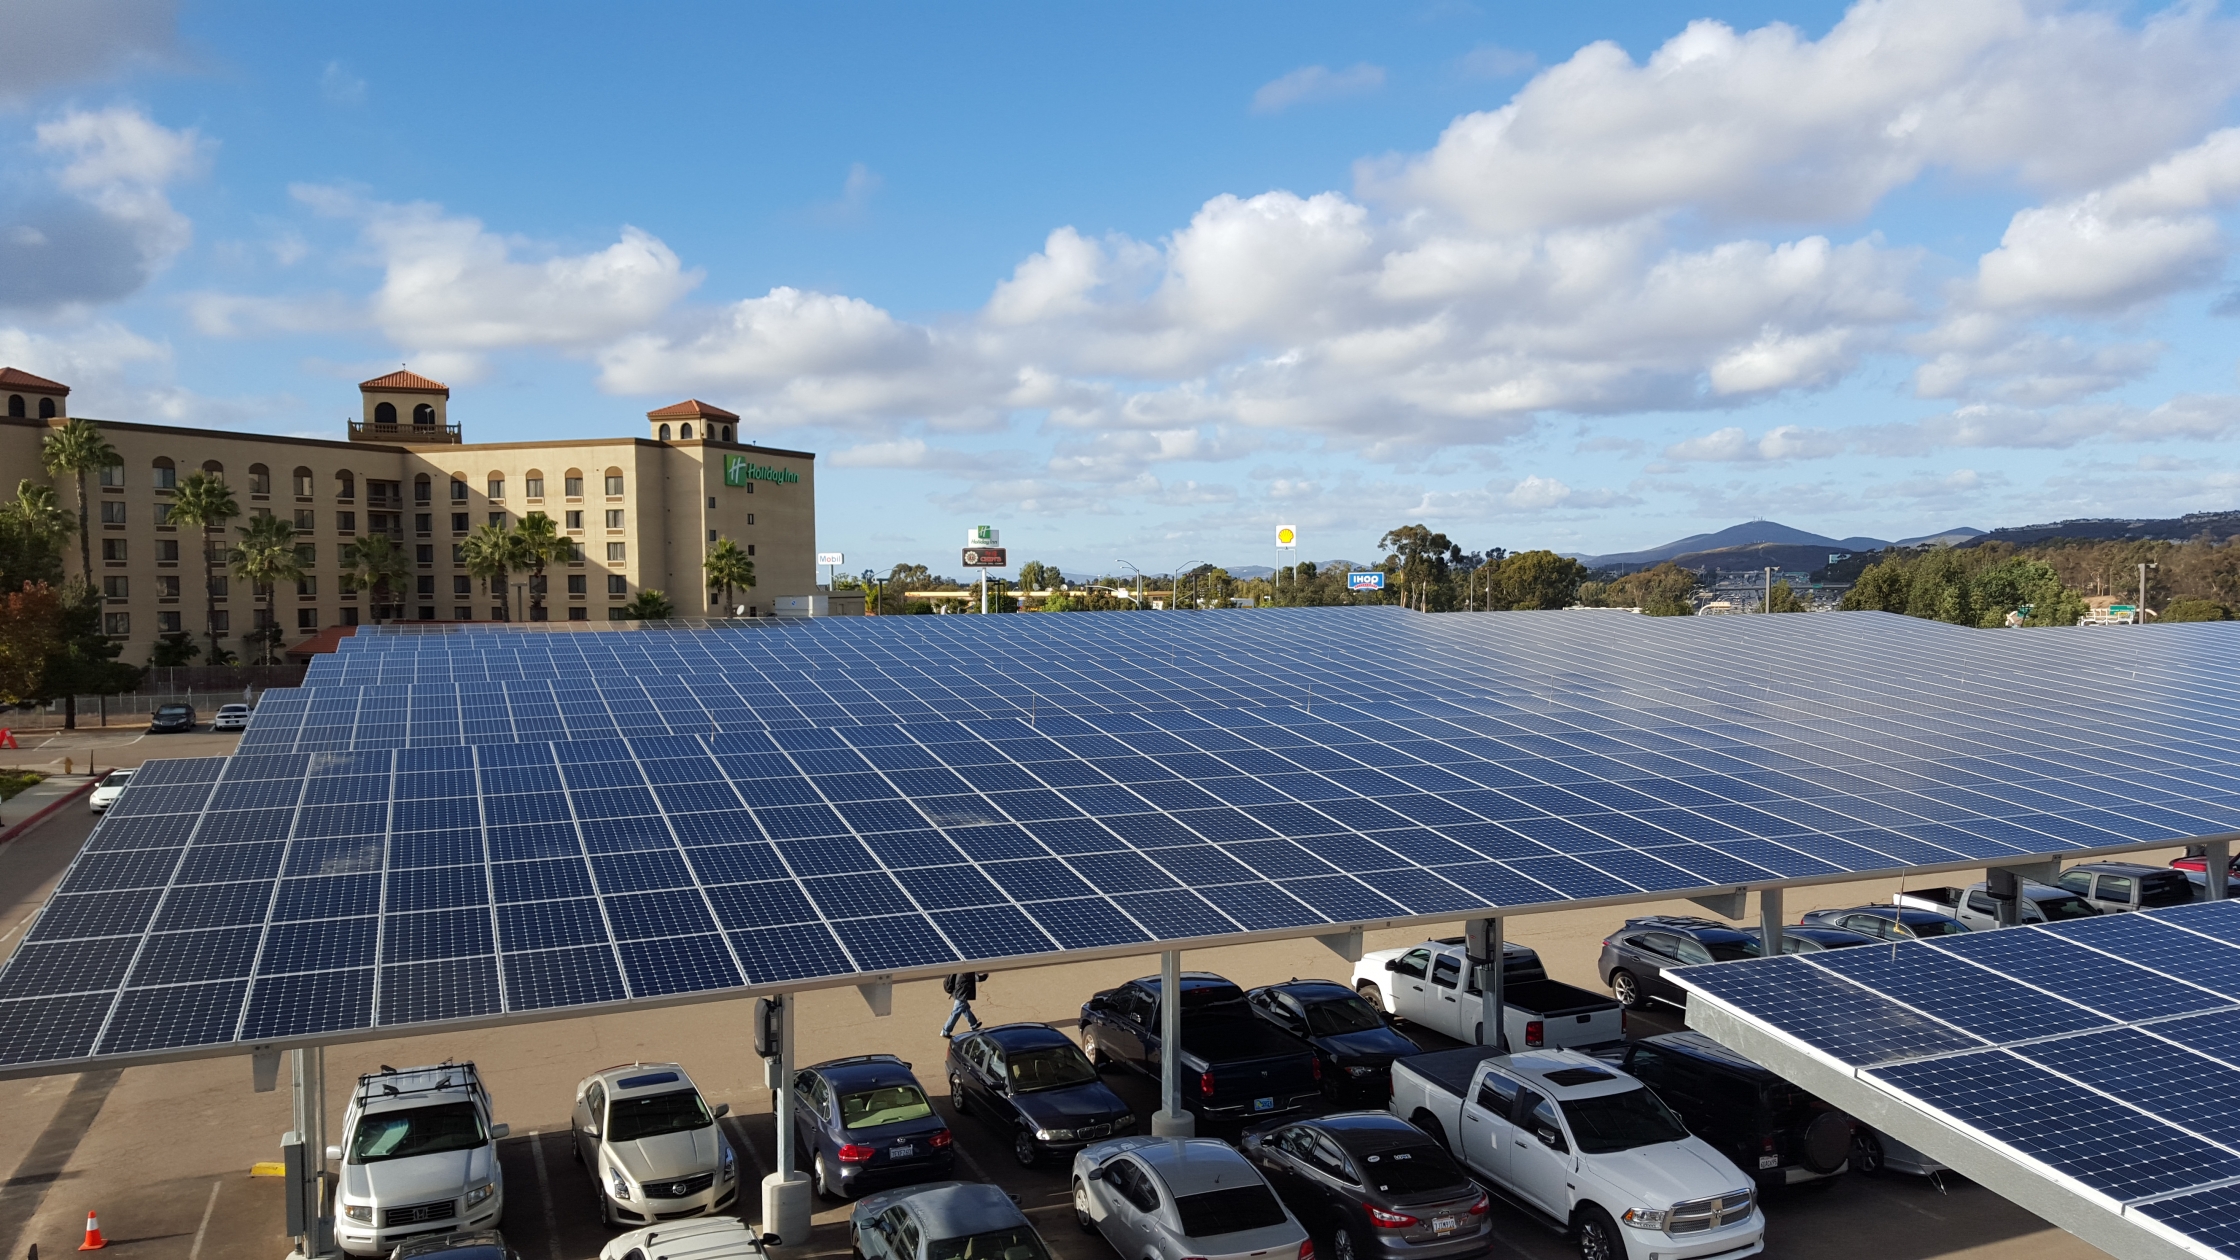 A 936 KW solar carport array installed on a Federal Aviation Administration compound in California through a performance contract with a local utility company.